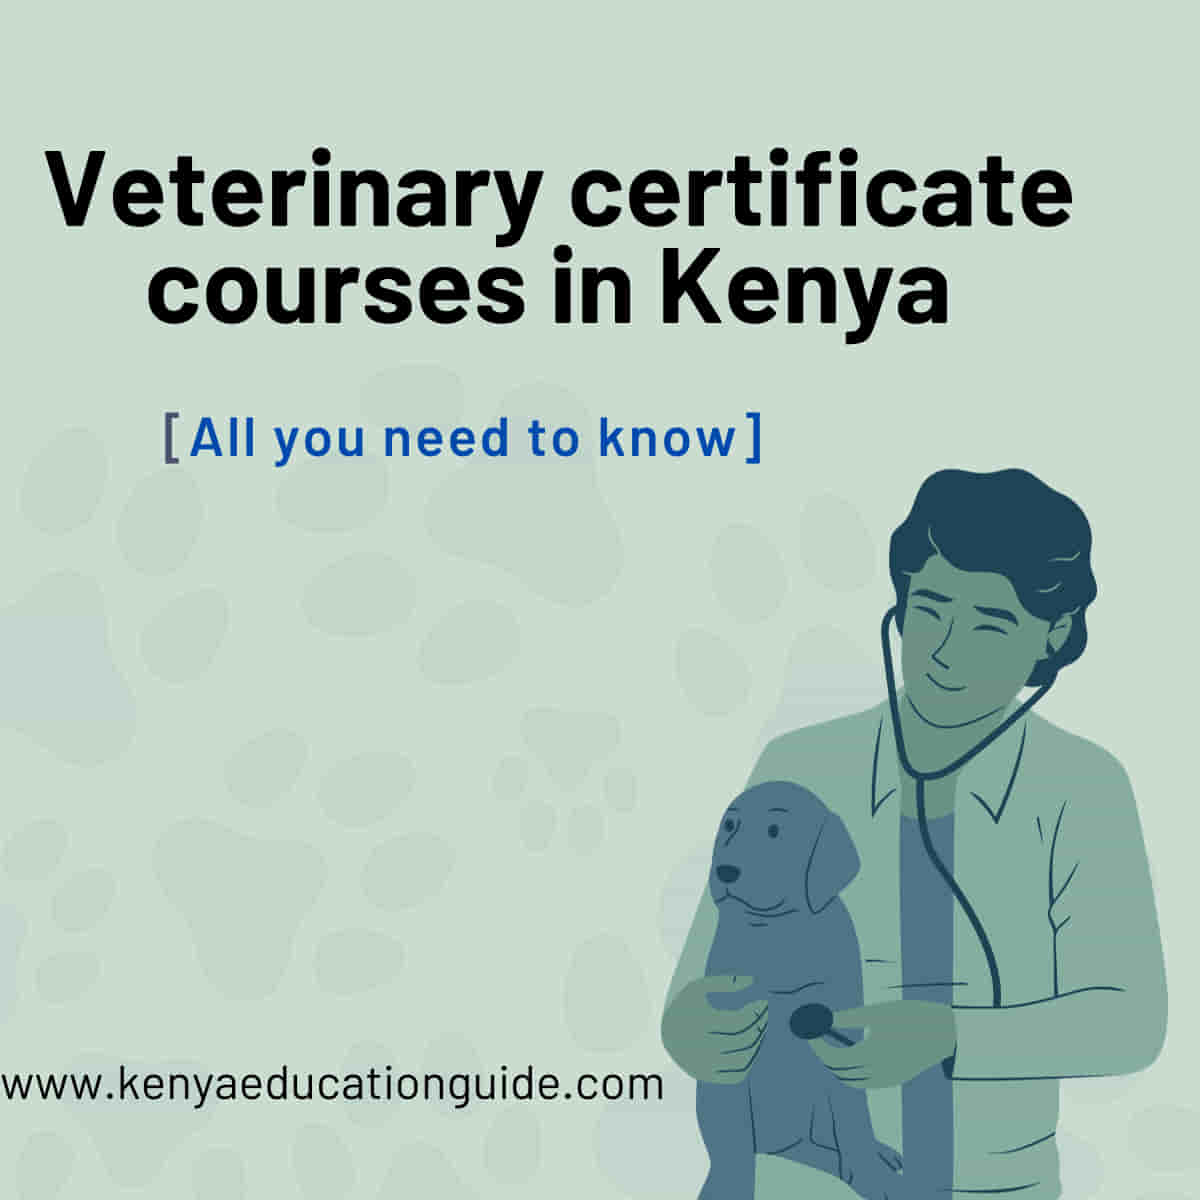 Veterinary certificate courses in Kenya [All you need to know]